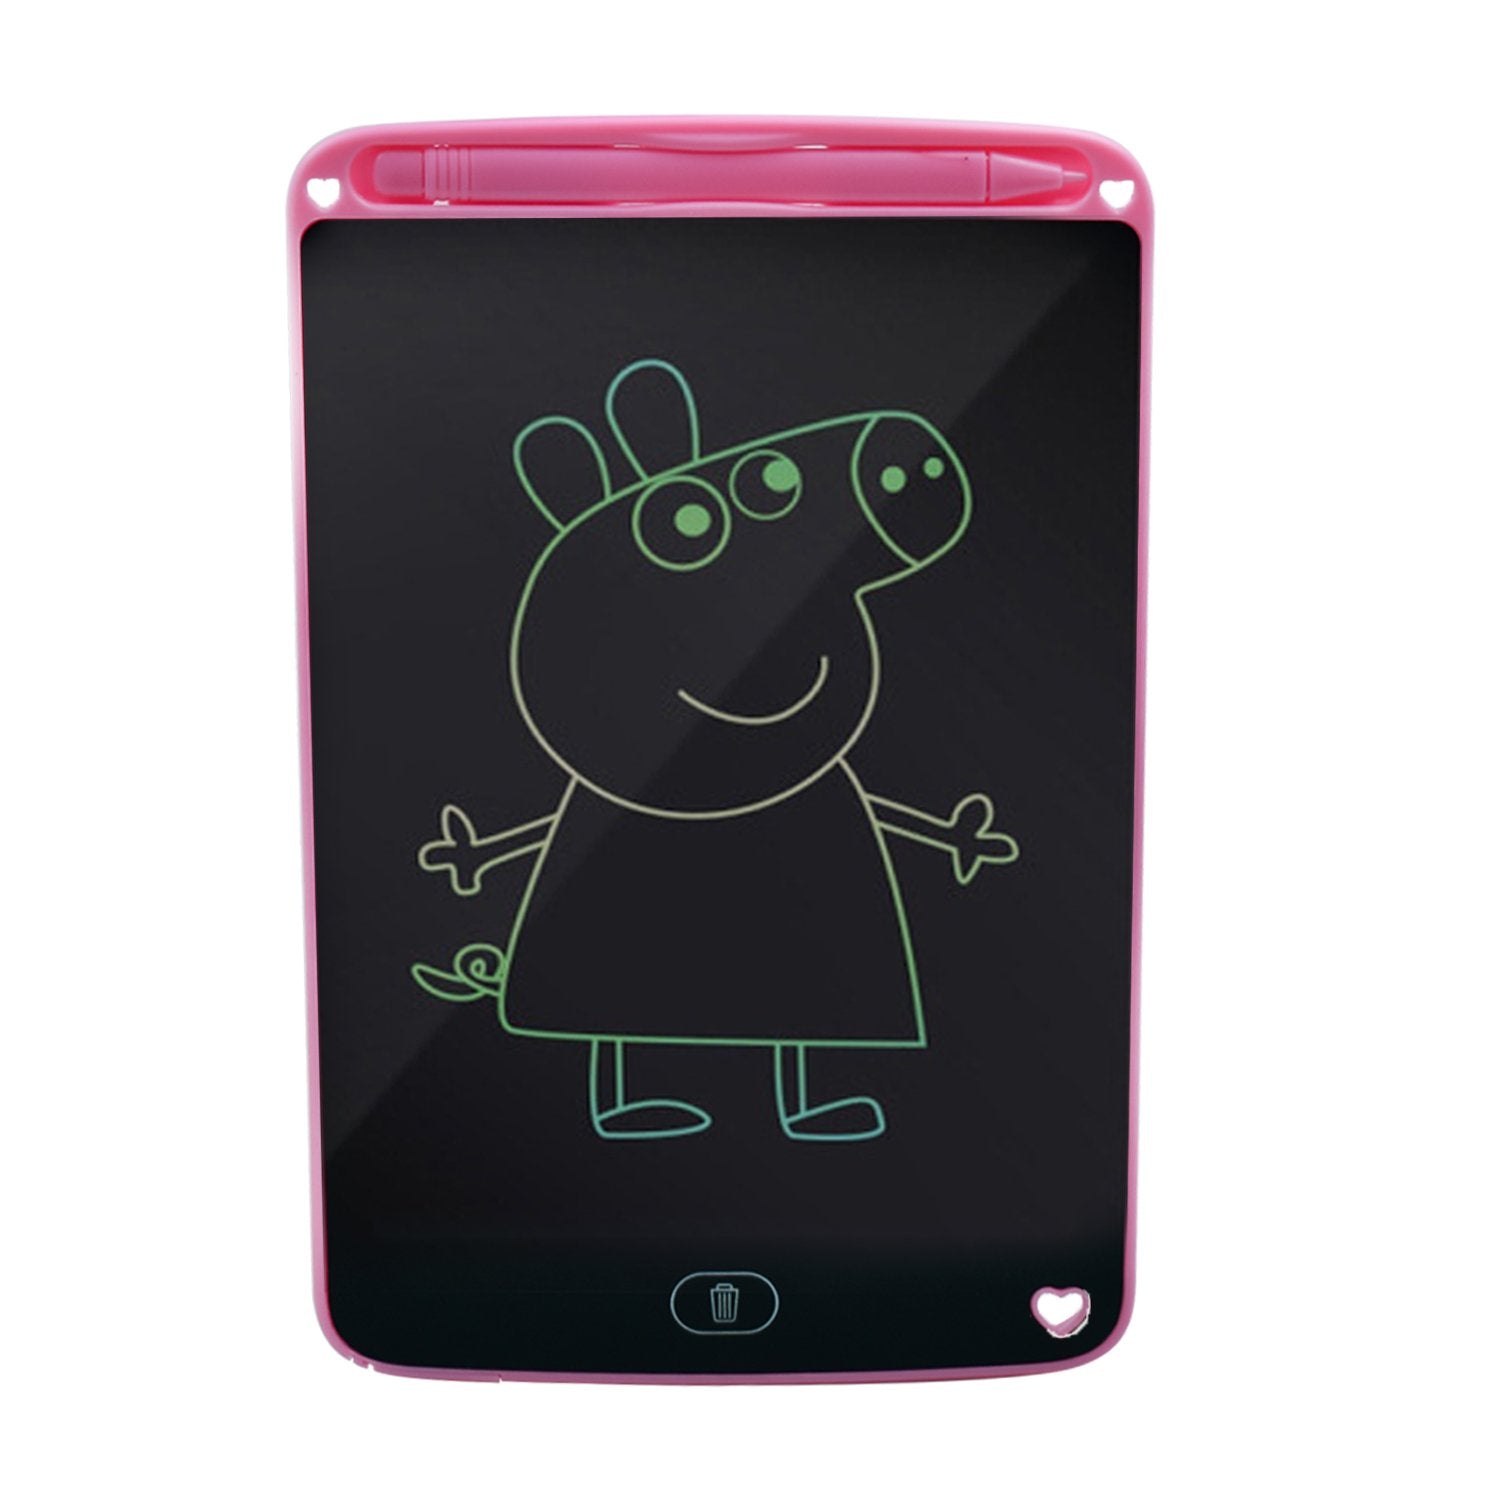 1465 Portable 8.5 LCD Writing Digital Tablet Pad for Writing/Drawing